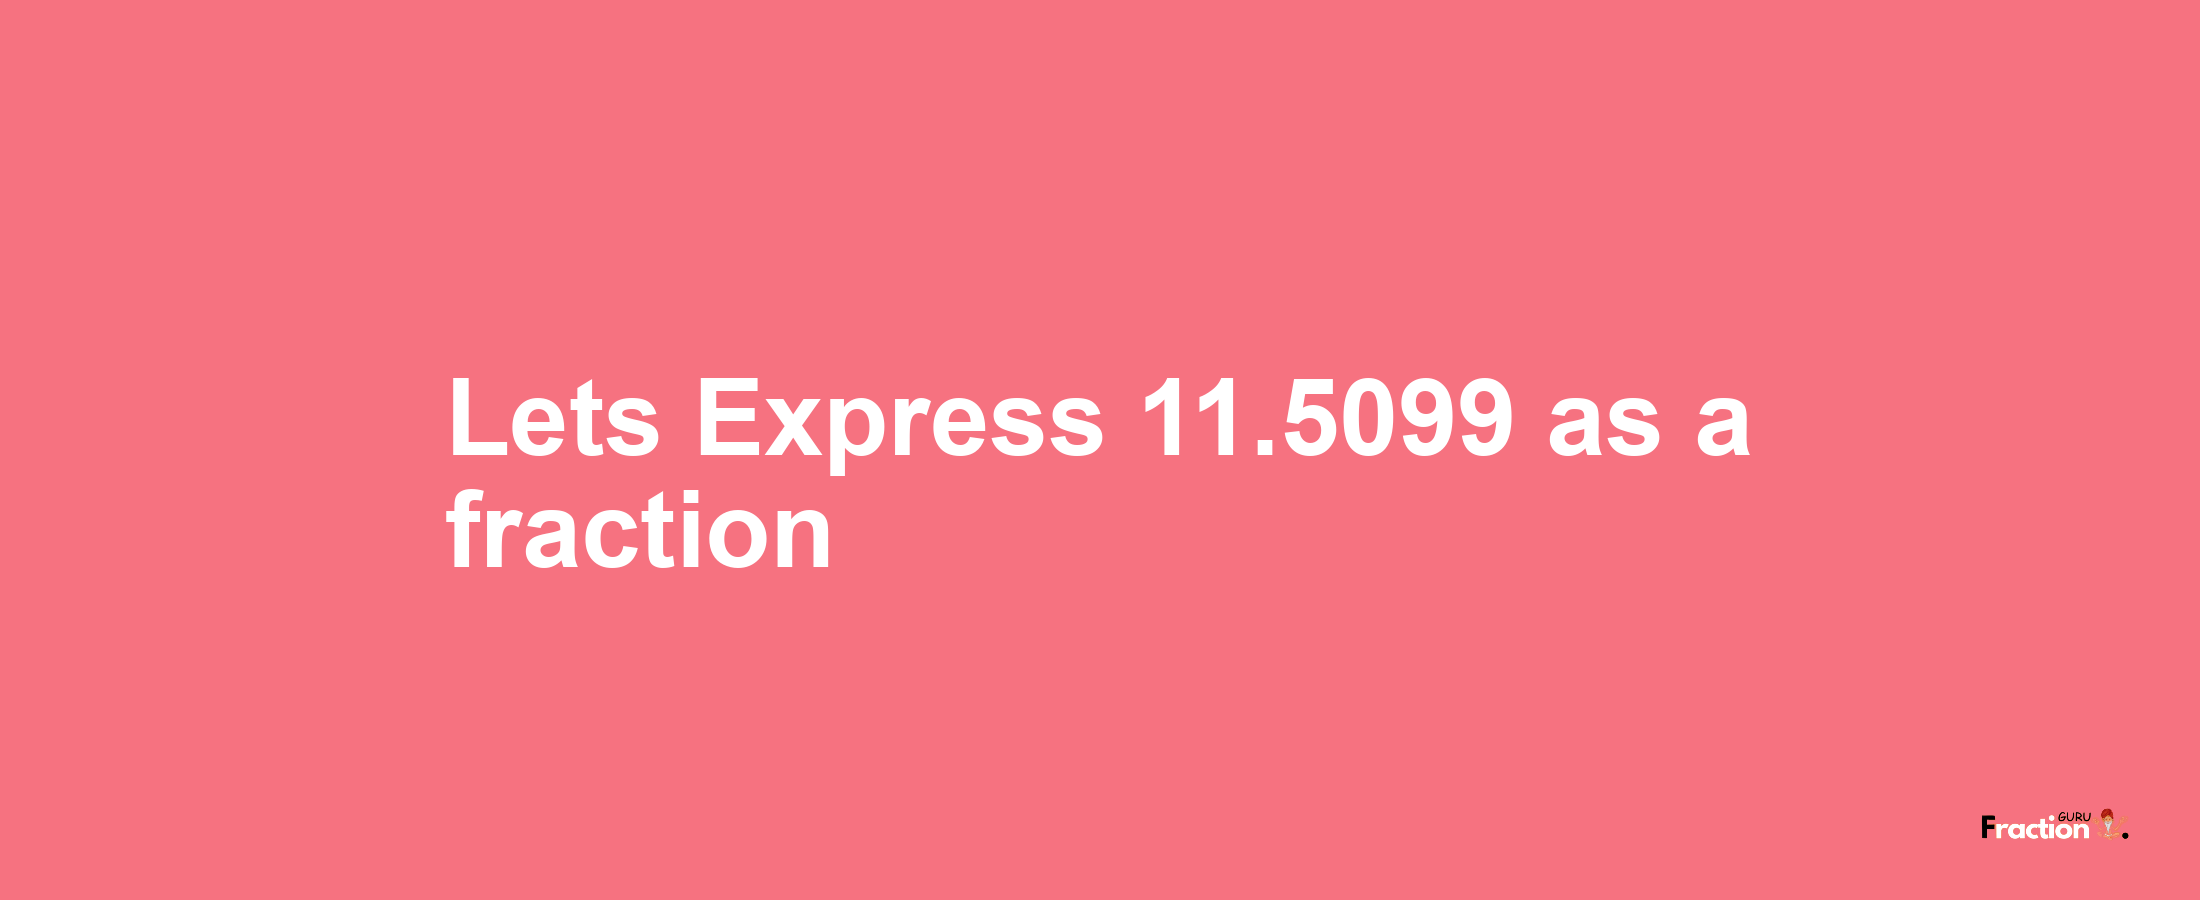 Lets Express 11.5099 as afraction